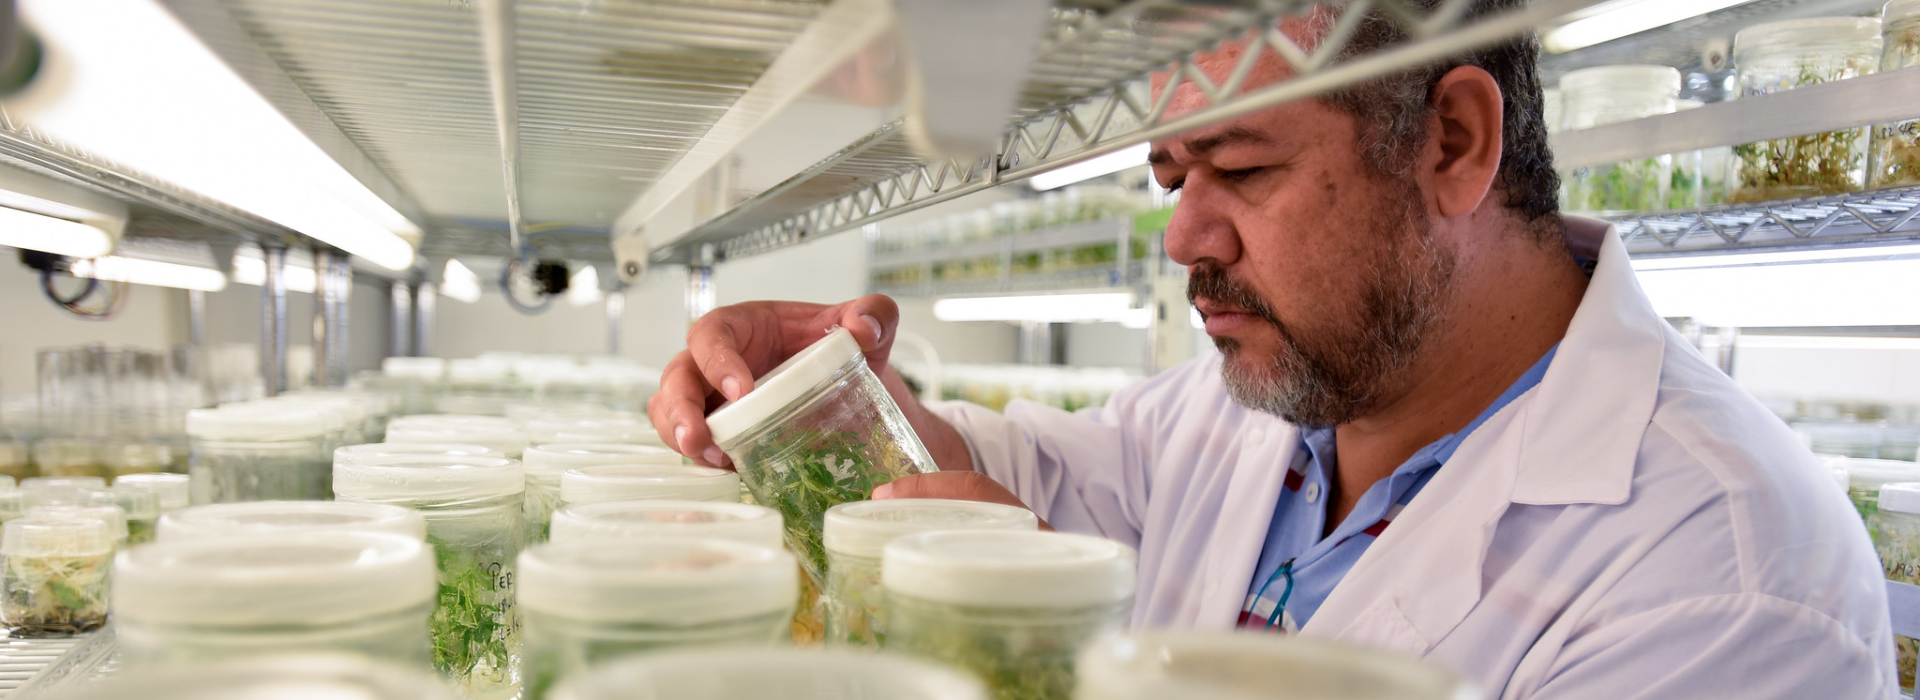 A person in a lab coat looking at a jar of plants.